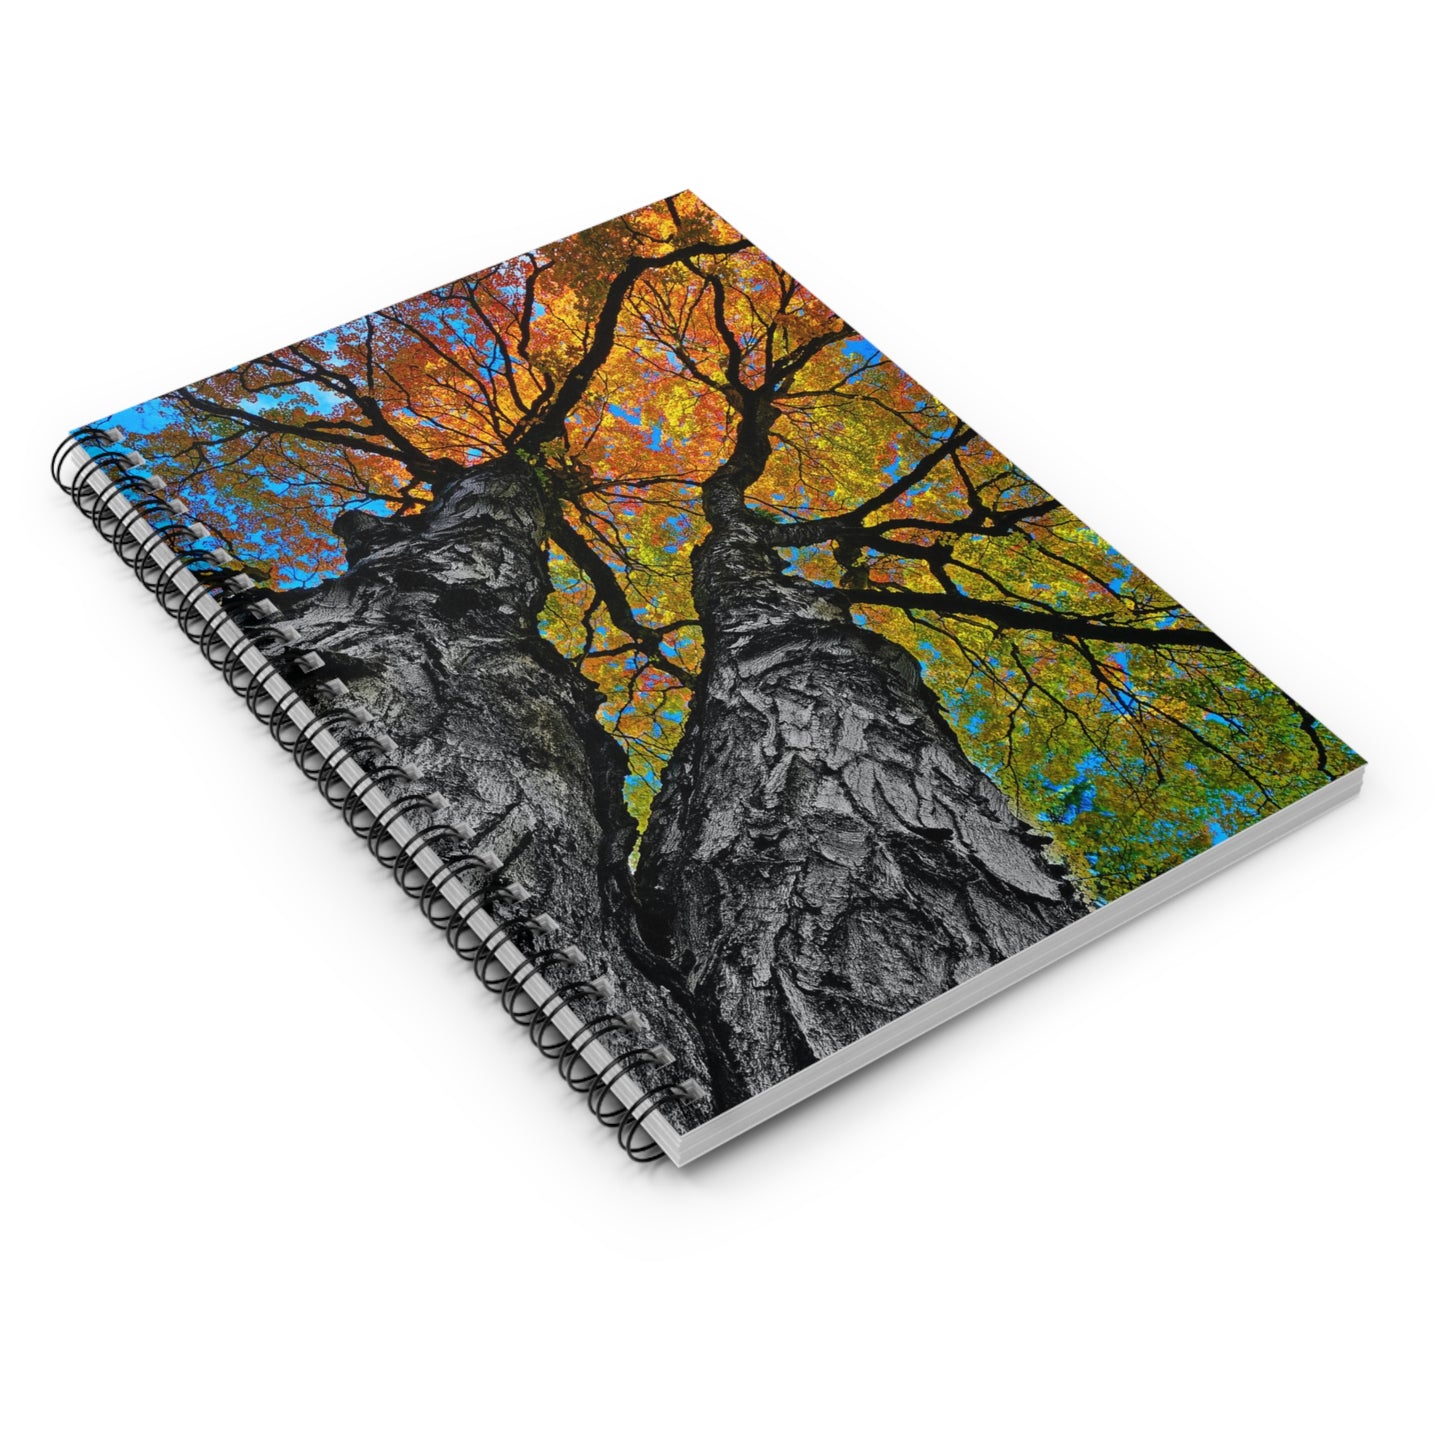 Autumn Canopy Chronicles Spiral Notebook - Ruled Line